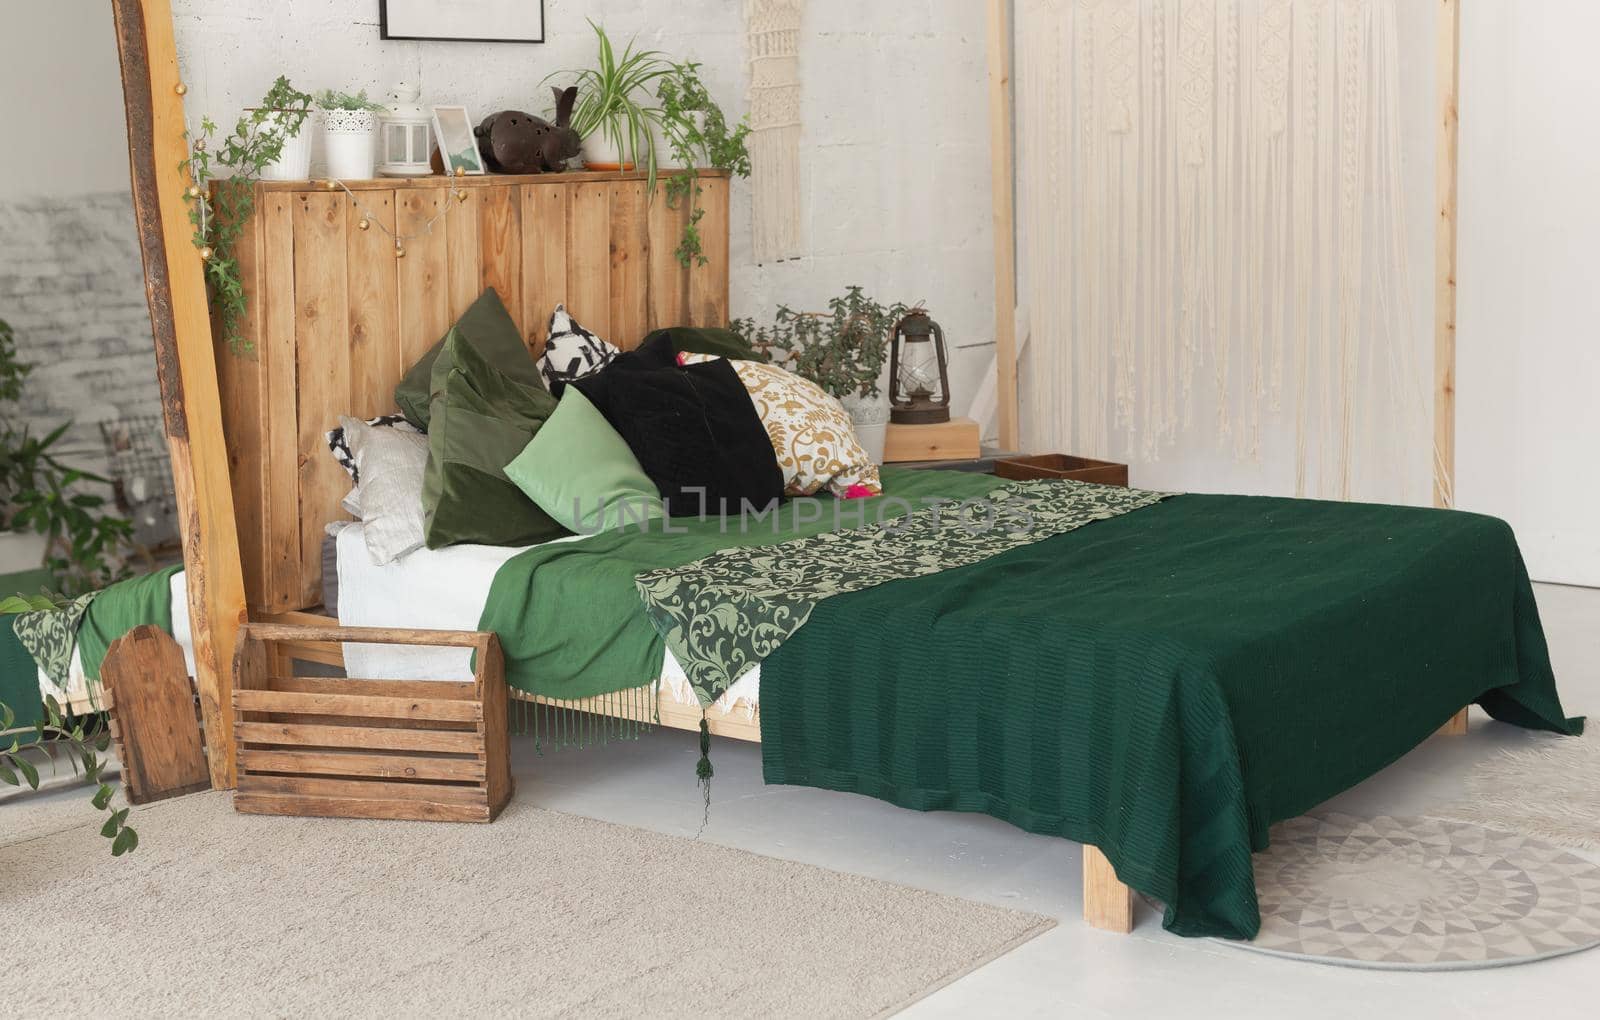 Comfortable bed with new green linens in eco style room interior by Satura86